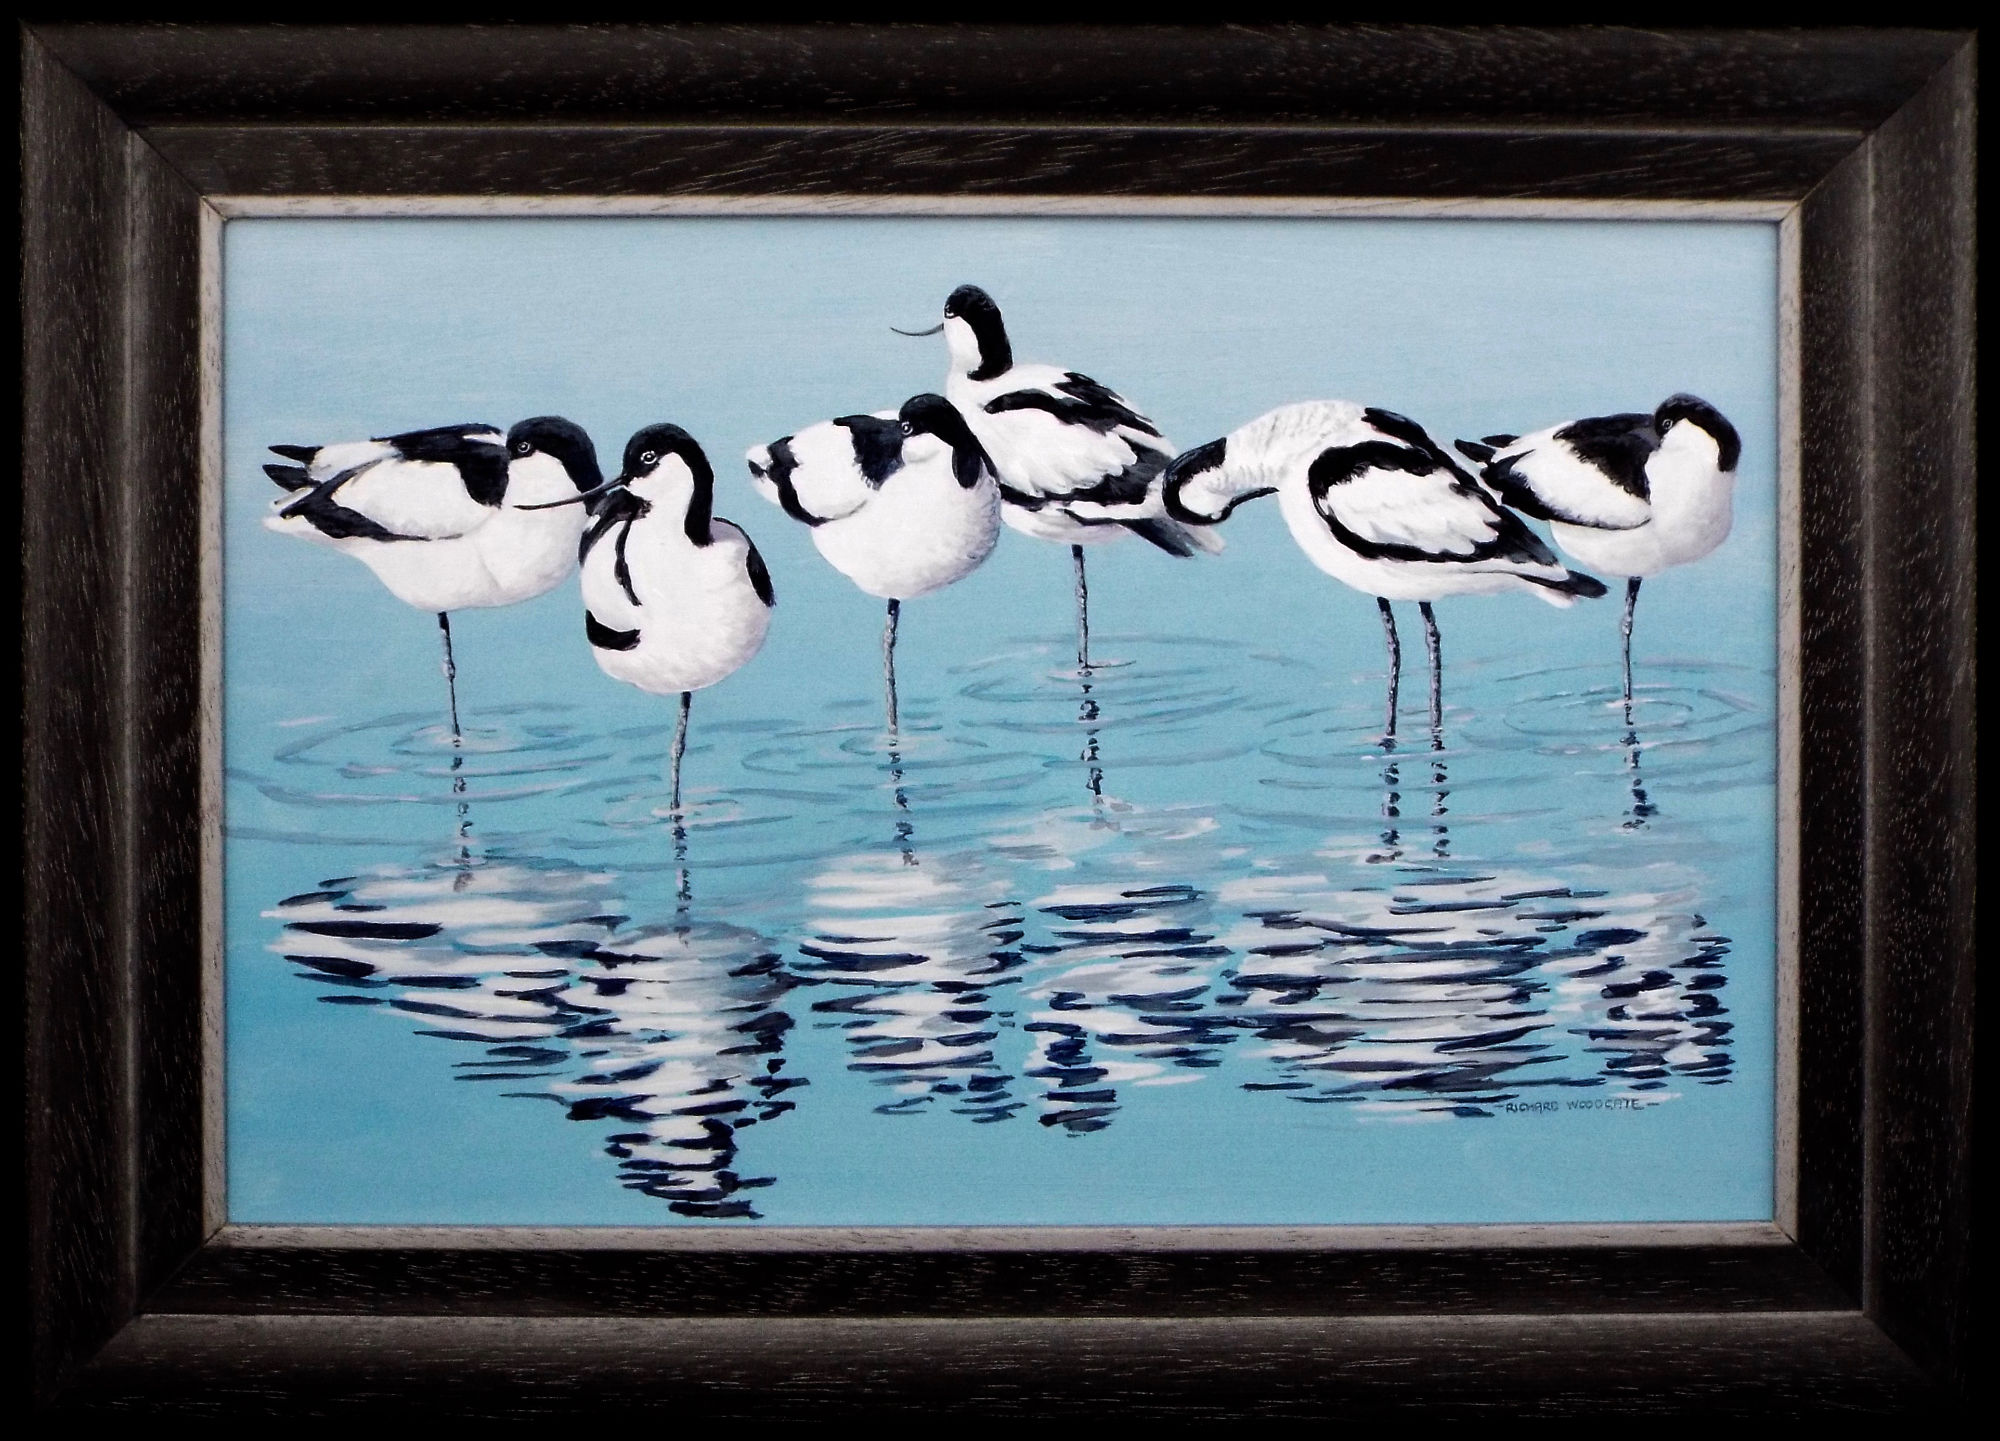 Avocet Reflections by Richard Woodgate.